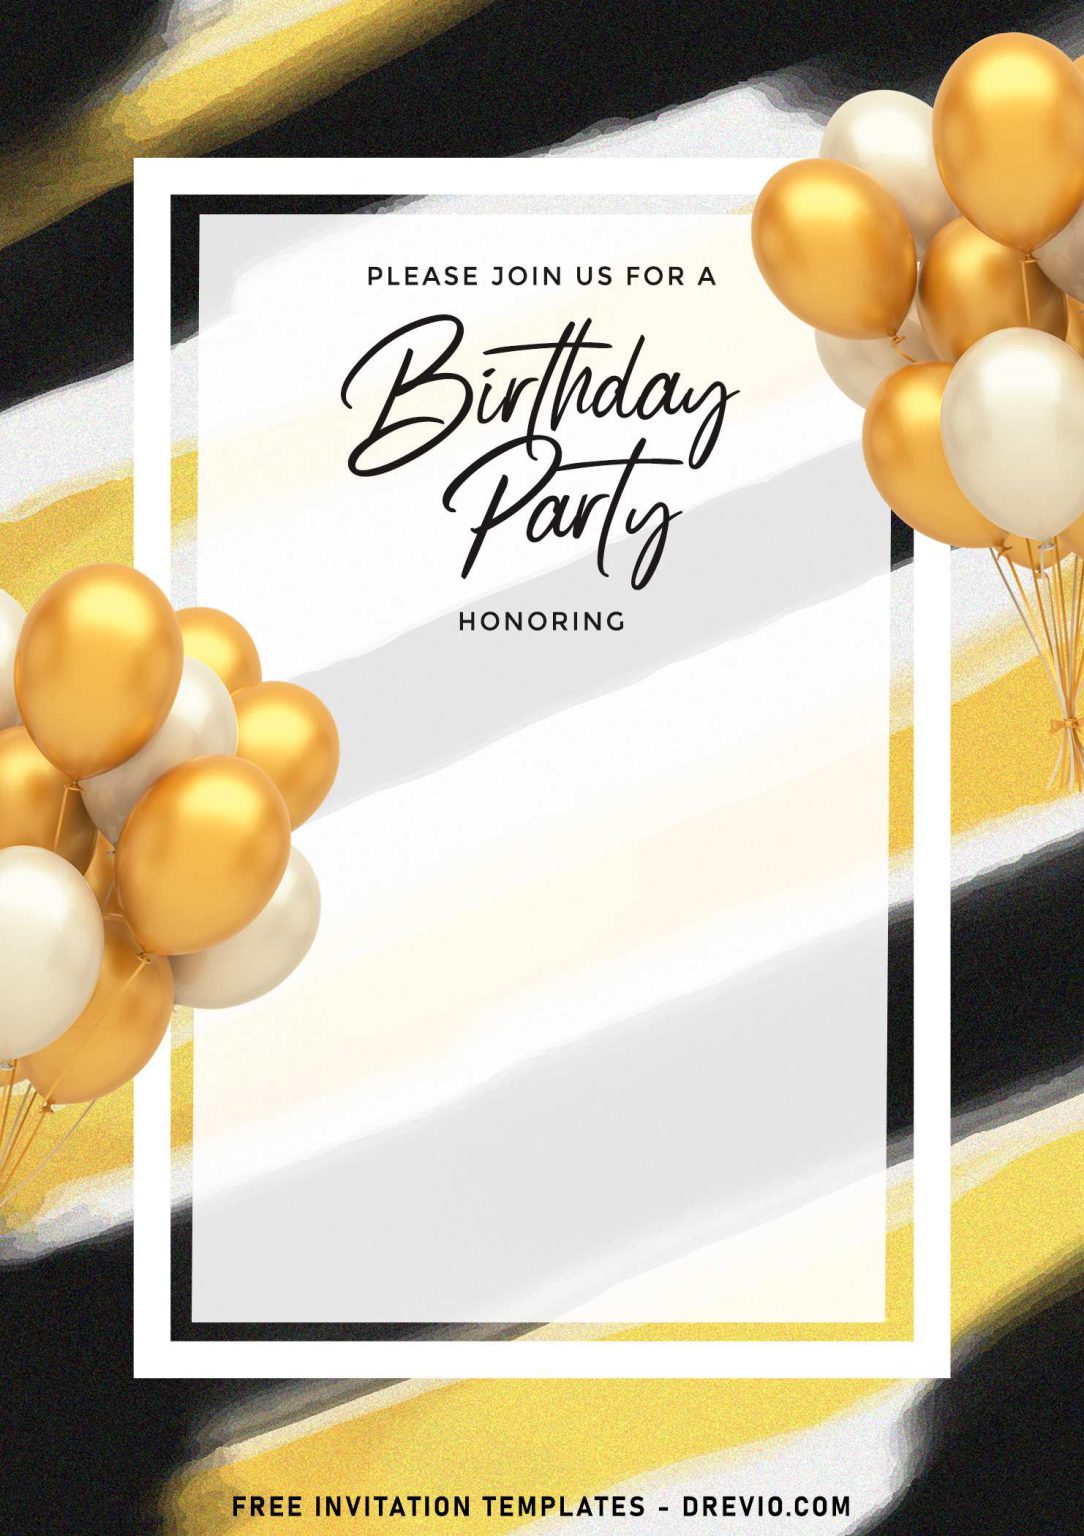 Birthday Party Templates Free Download